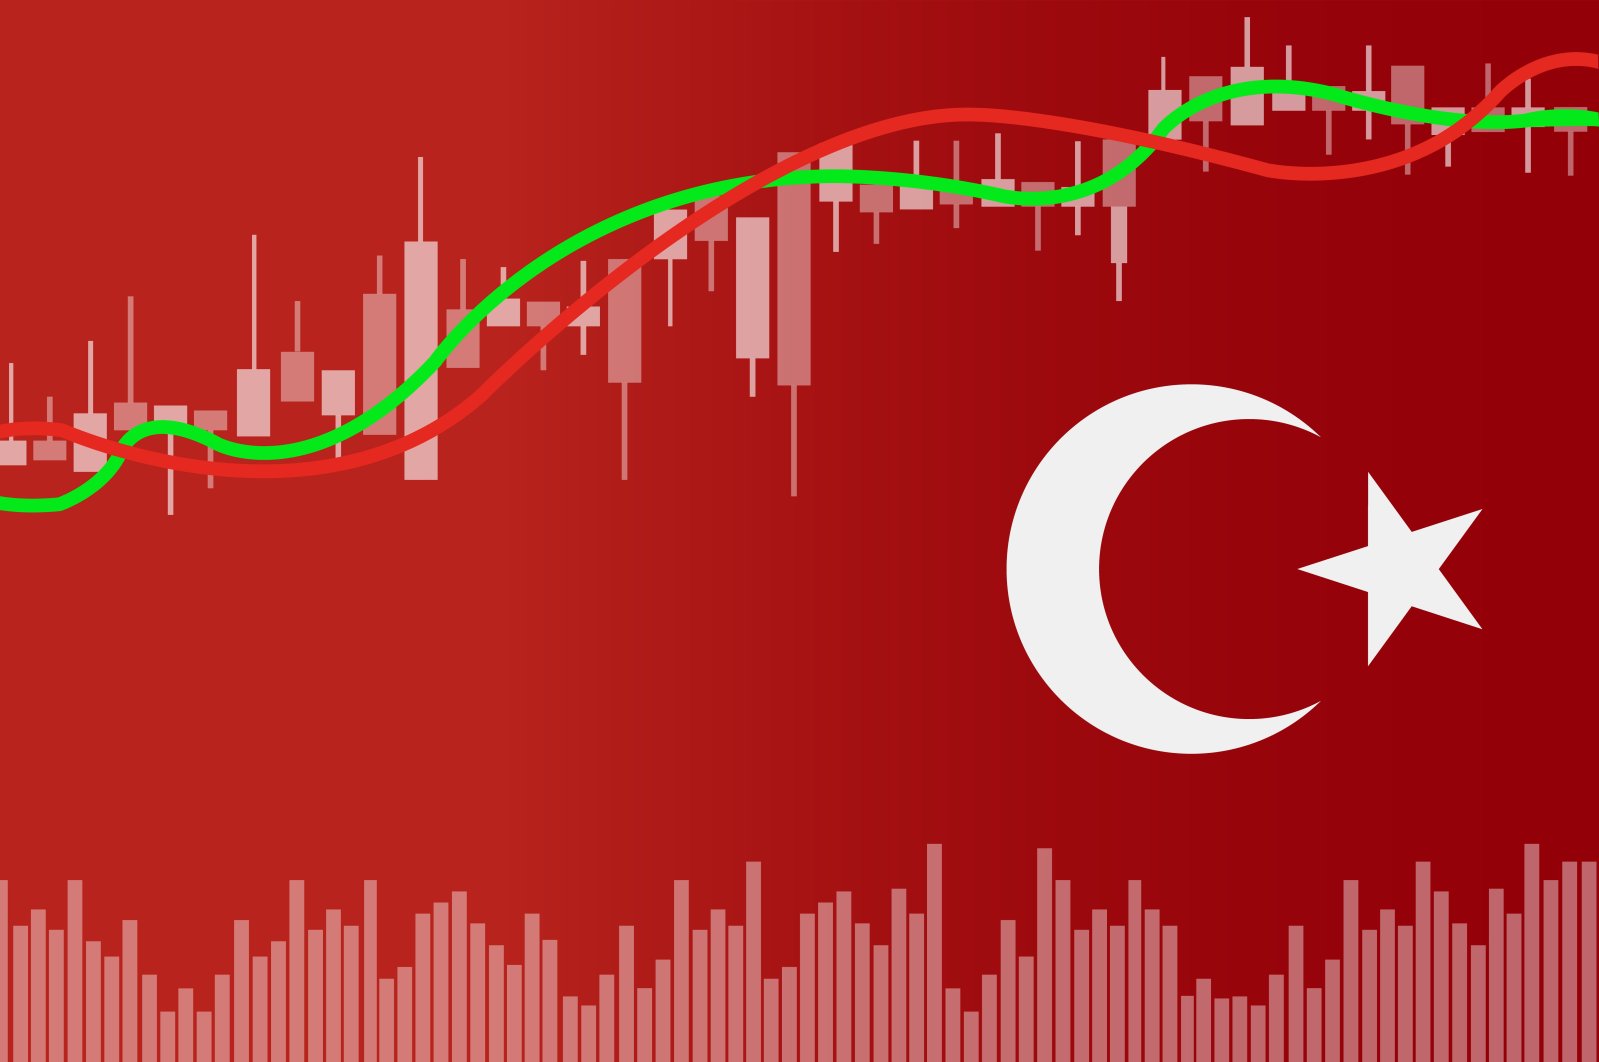 Türkiye has opted for growth and more employment at the cost of higher inflation. It has preferred inflation to the recession. That is, although inflation rose, growth and rising employment were chosen. (Illustration by Shutterstock)